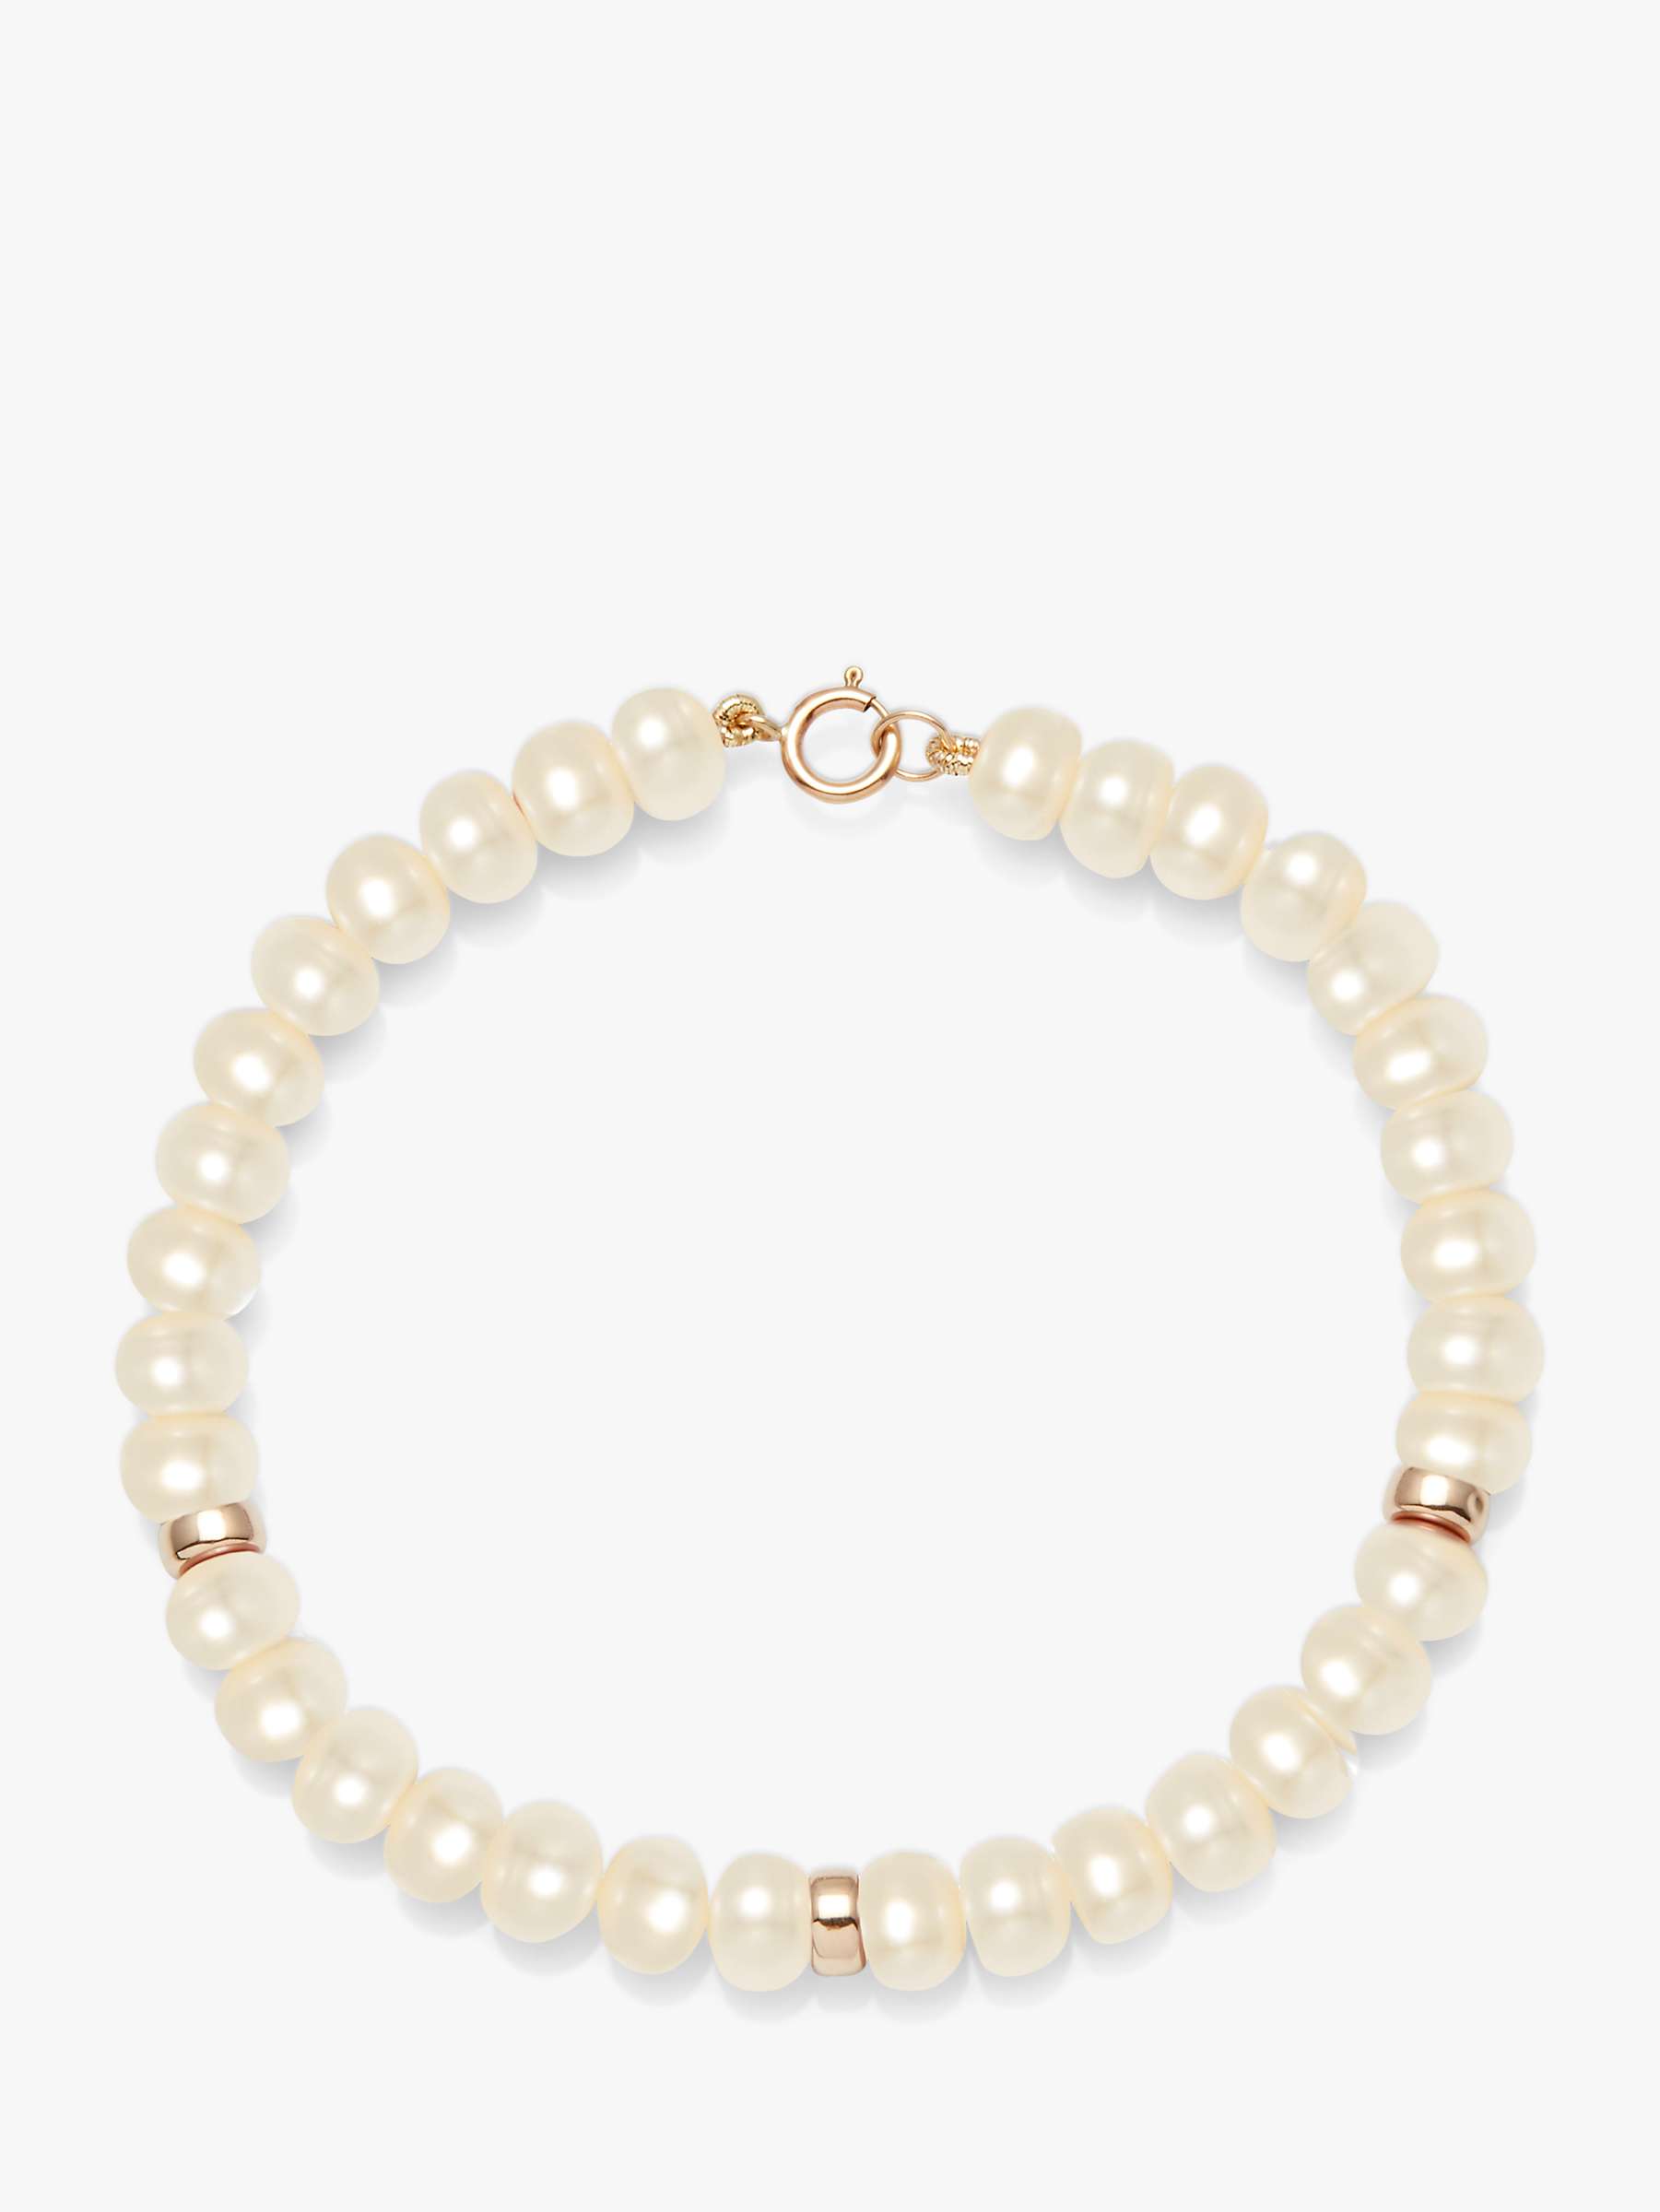 Buy A B Davis 9ct Gold Rondelle and Freshwater Pearl Bracelet Online at johnlewis.com